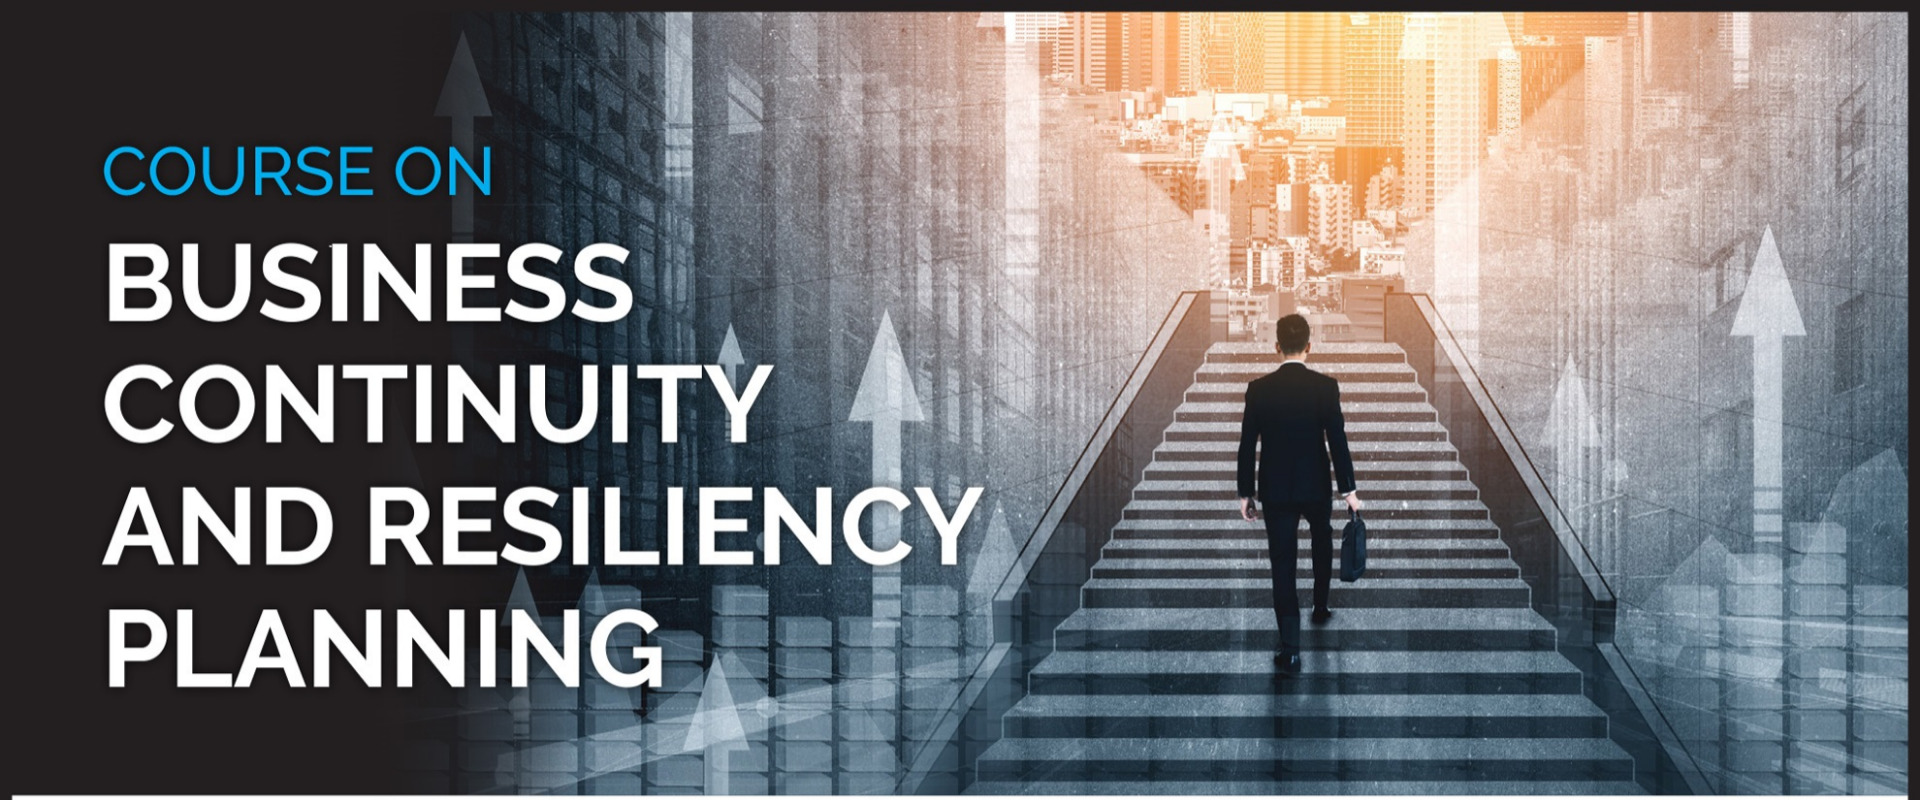 Register for the upcoming course on Business Continuity and Resiliency Planning